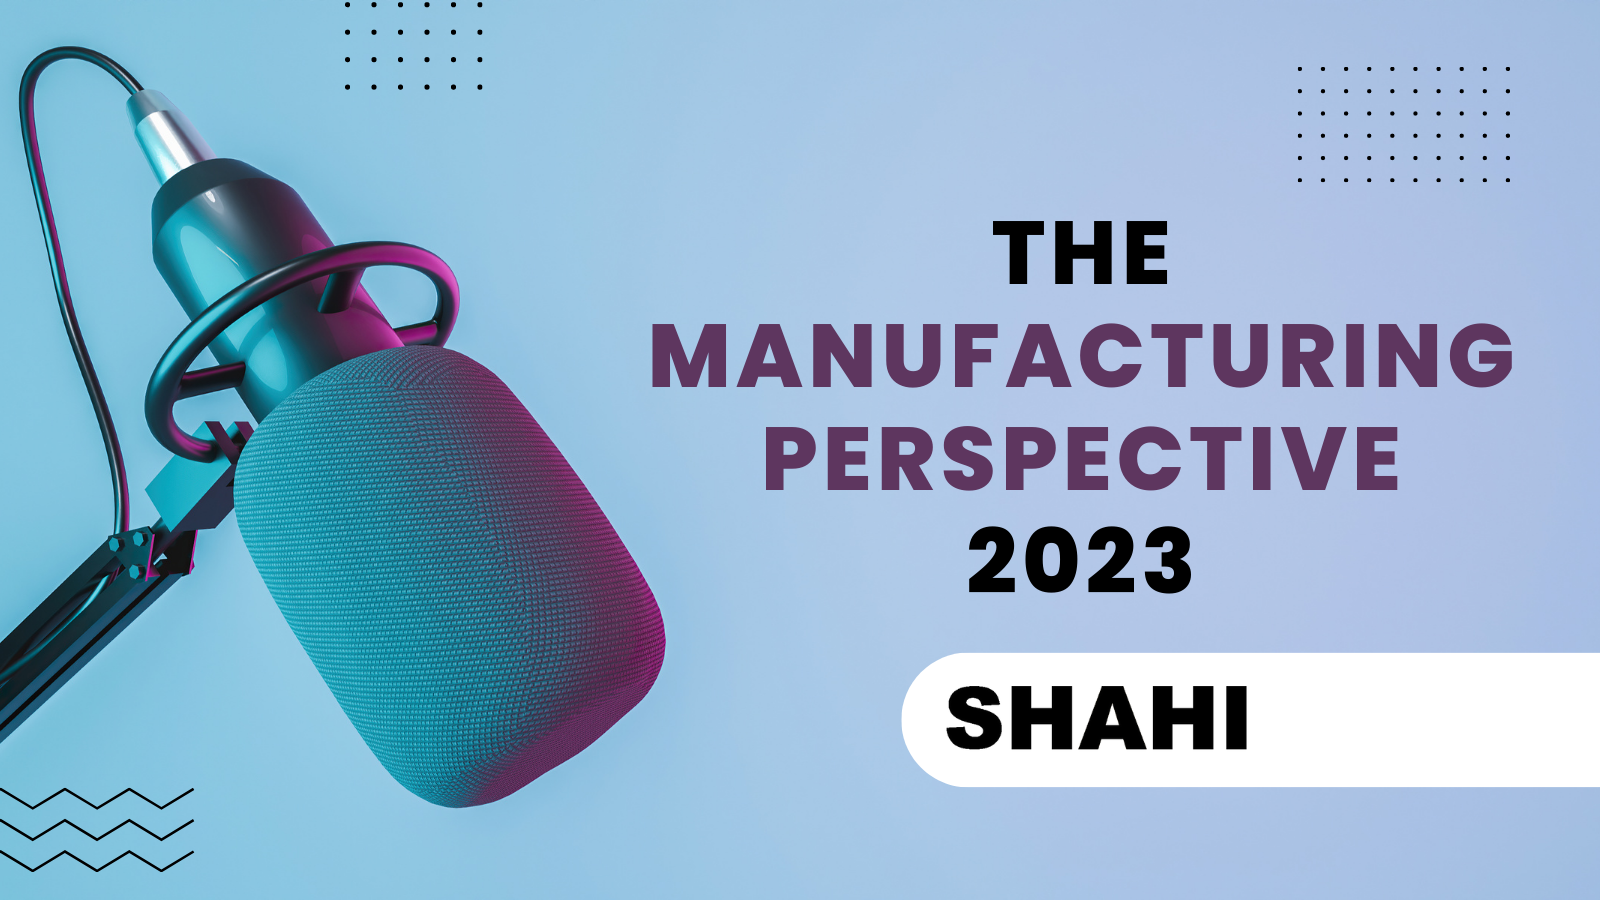 The Manufacturing Perspective